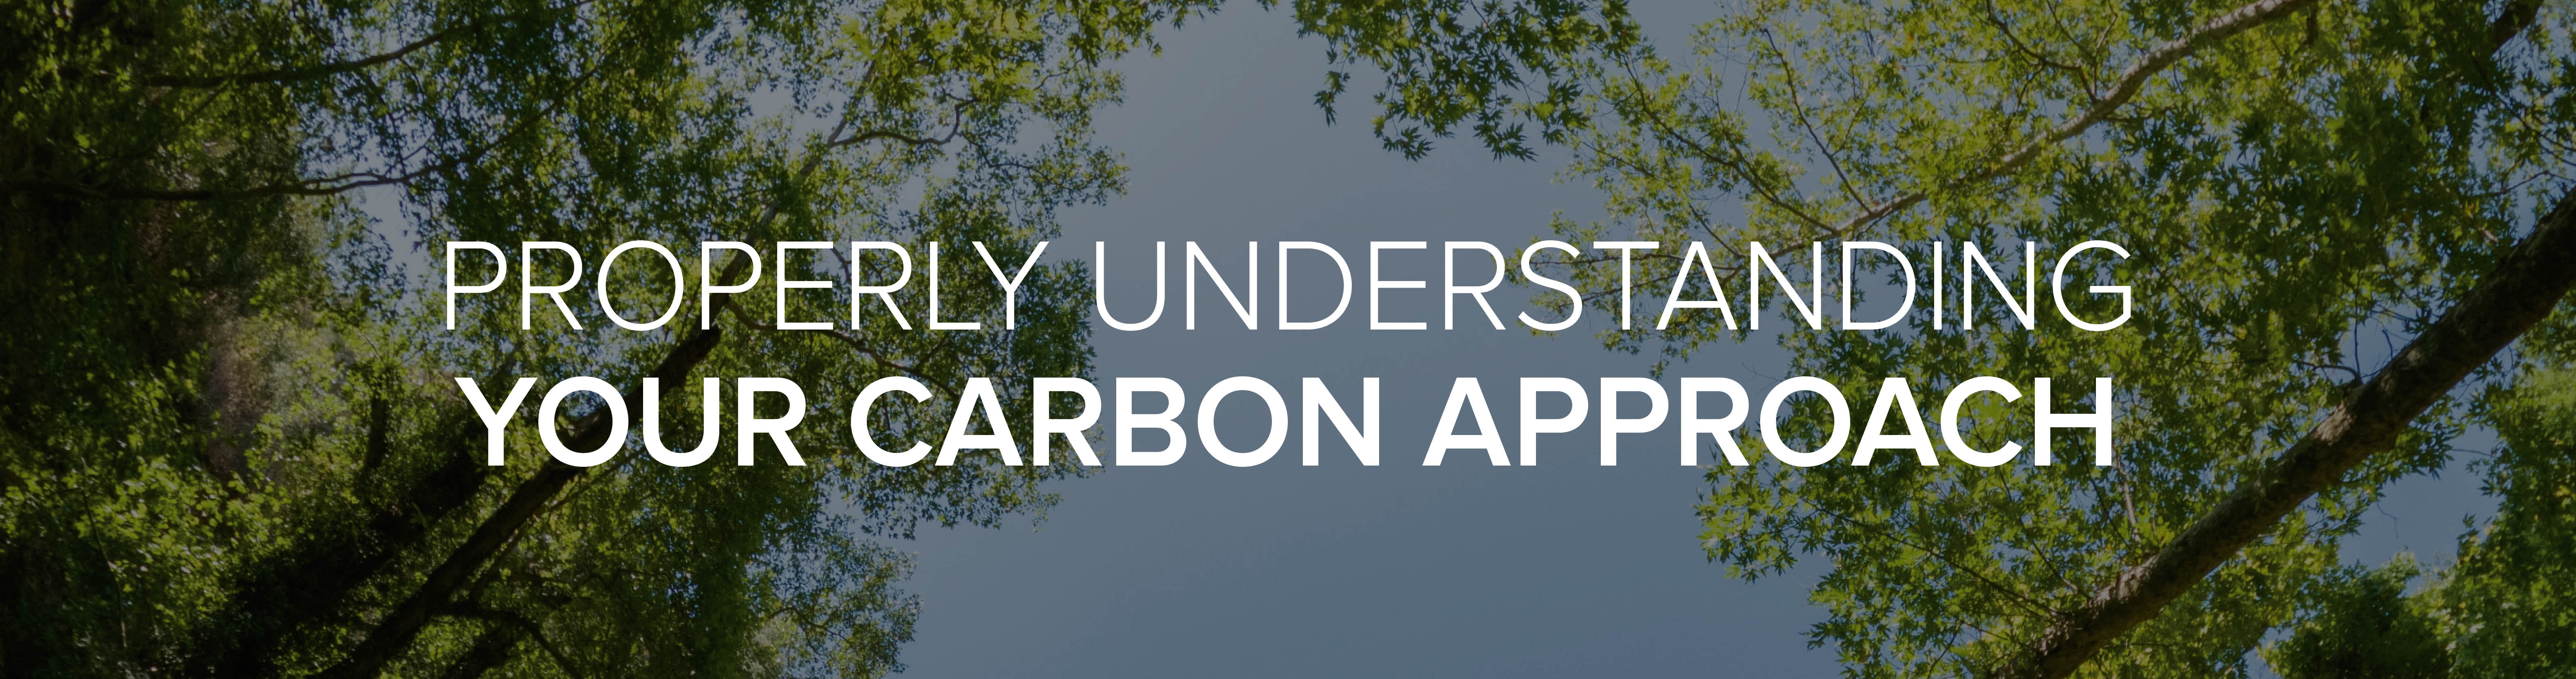 Properly understanding your carbon approach | Reforest'Action